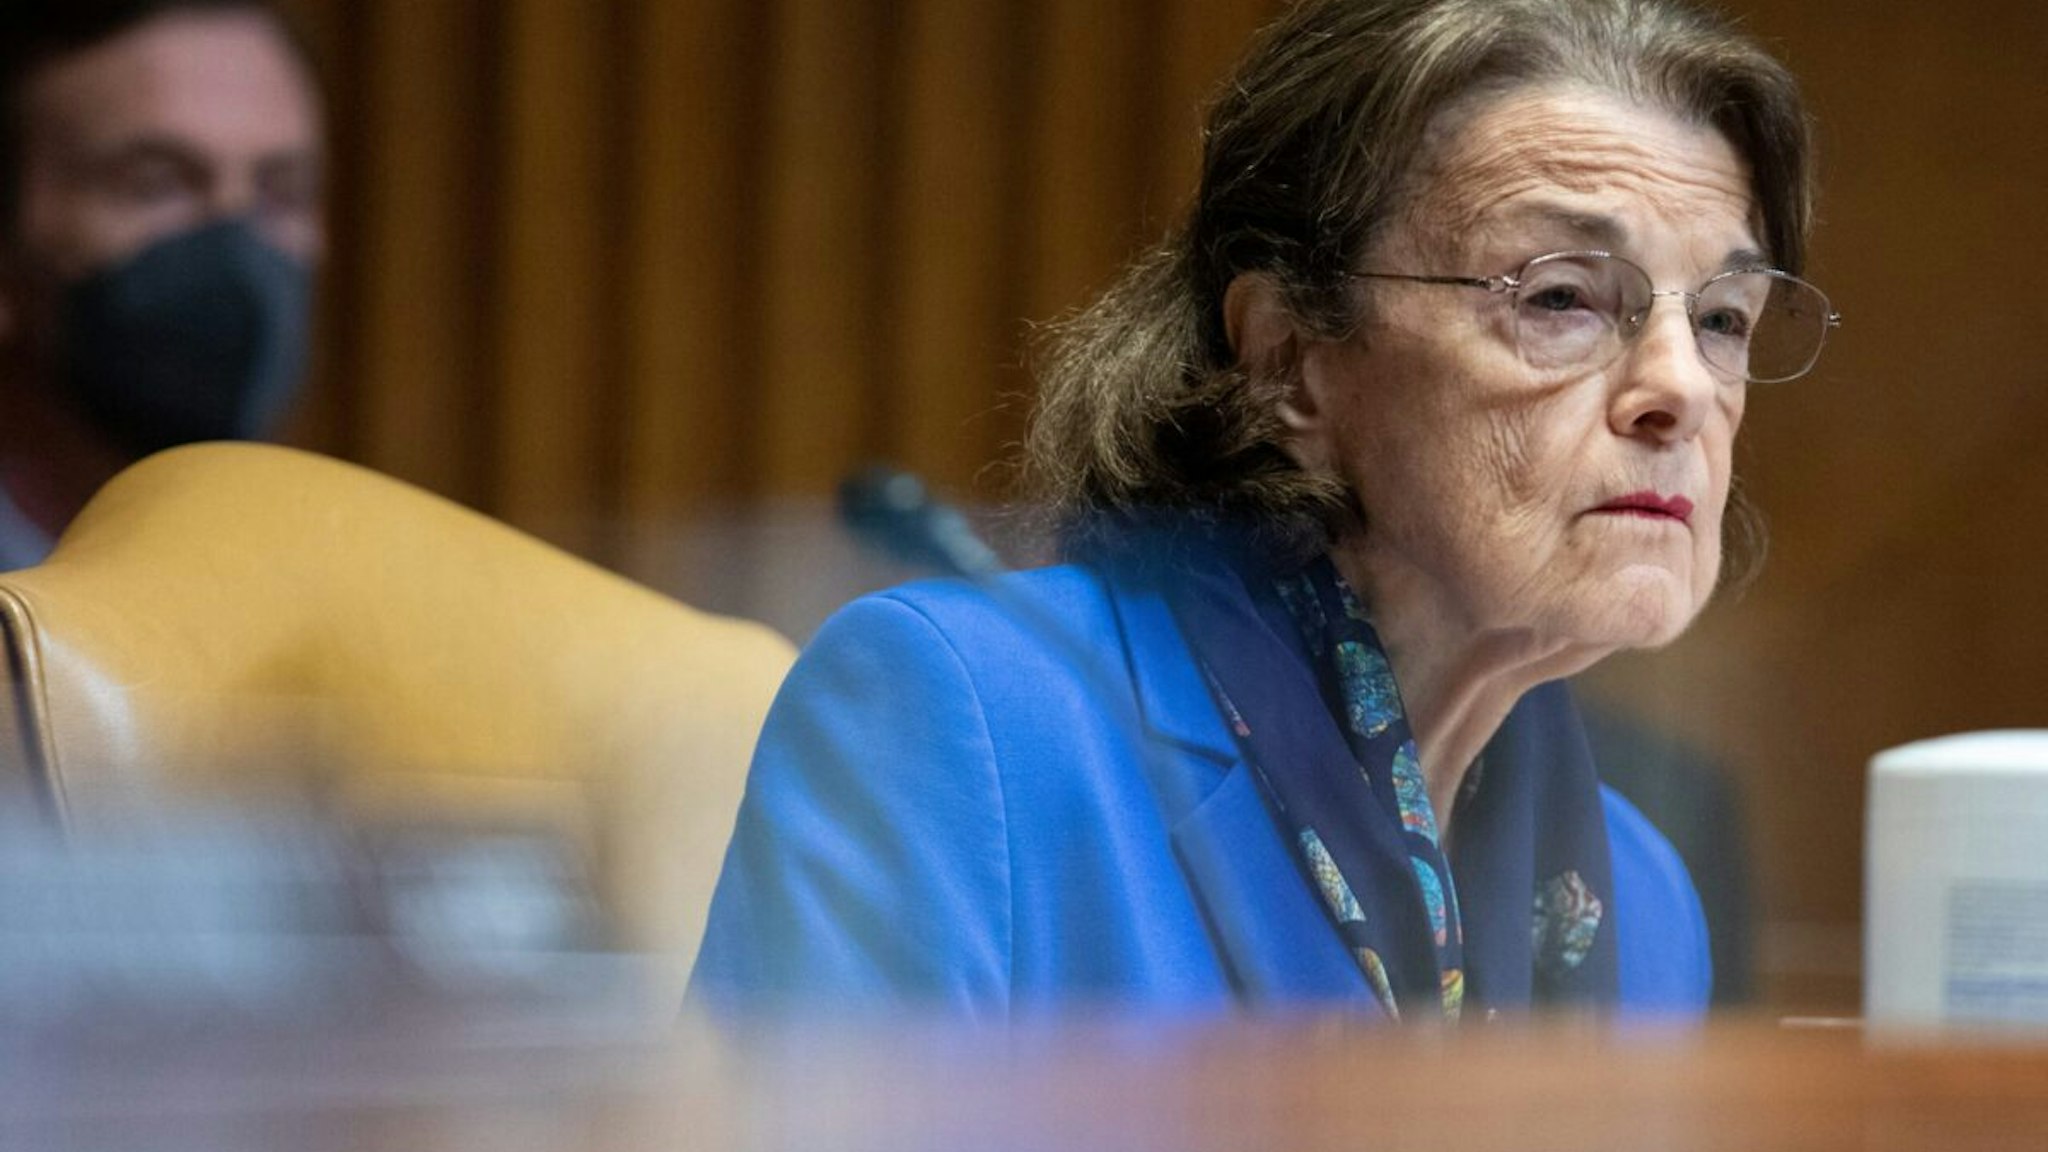 Senator Dianne Feinstein, D-Calif questions US Secretary of Defense Lloyd Austin and Chairman of the Joint Chiefs of Staff General Mark Milley while they testify before the Senate Appropriations Committee Subcommittee on Defense on Capitol Hill in Washington, DC, on May 3, 2022.